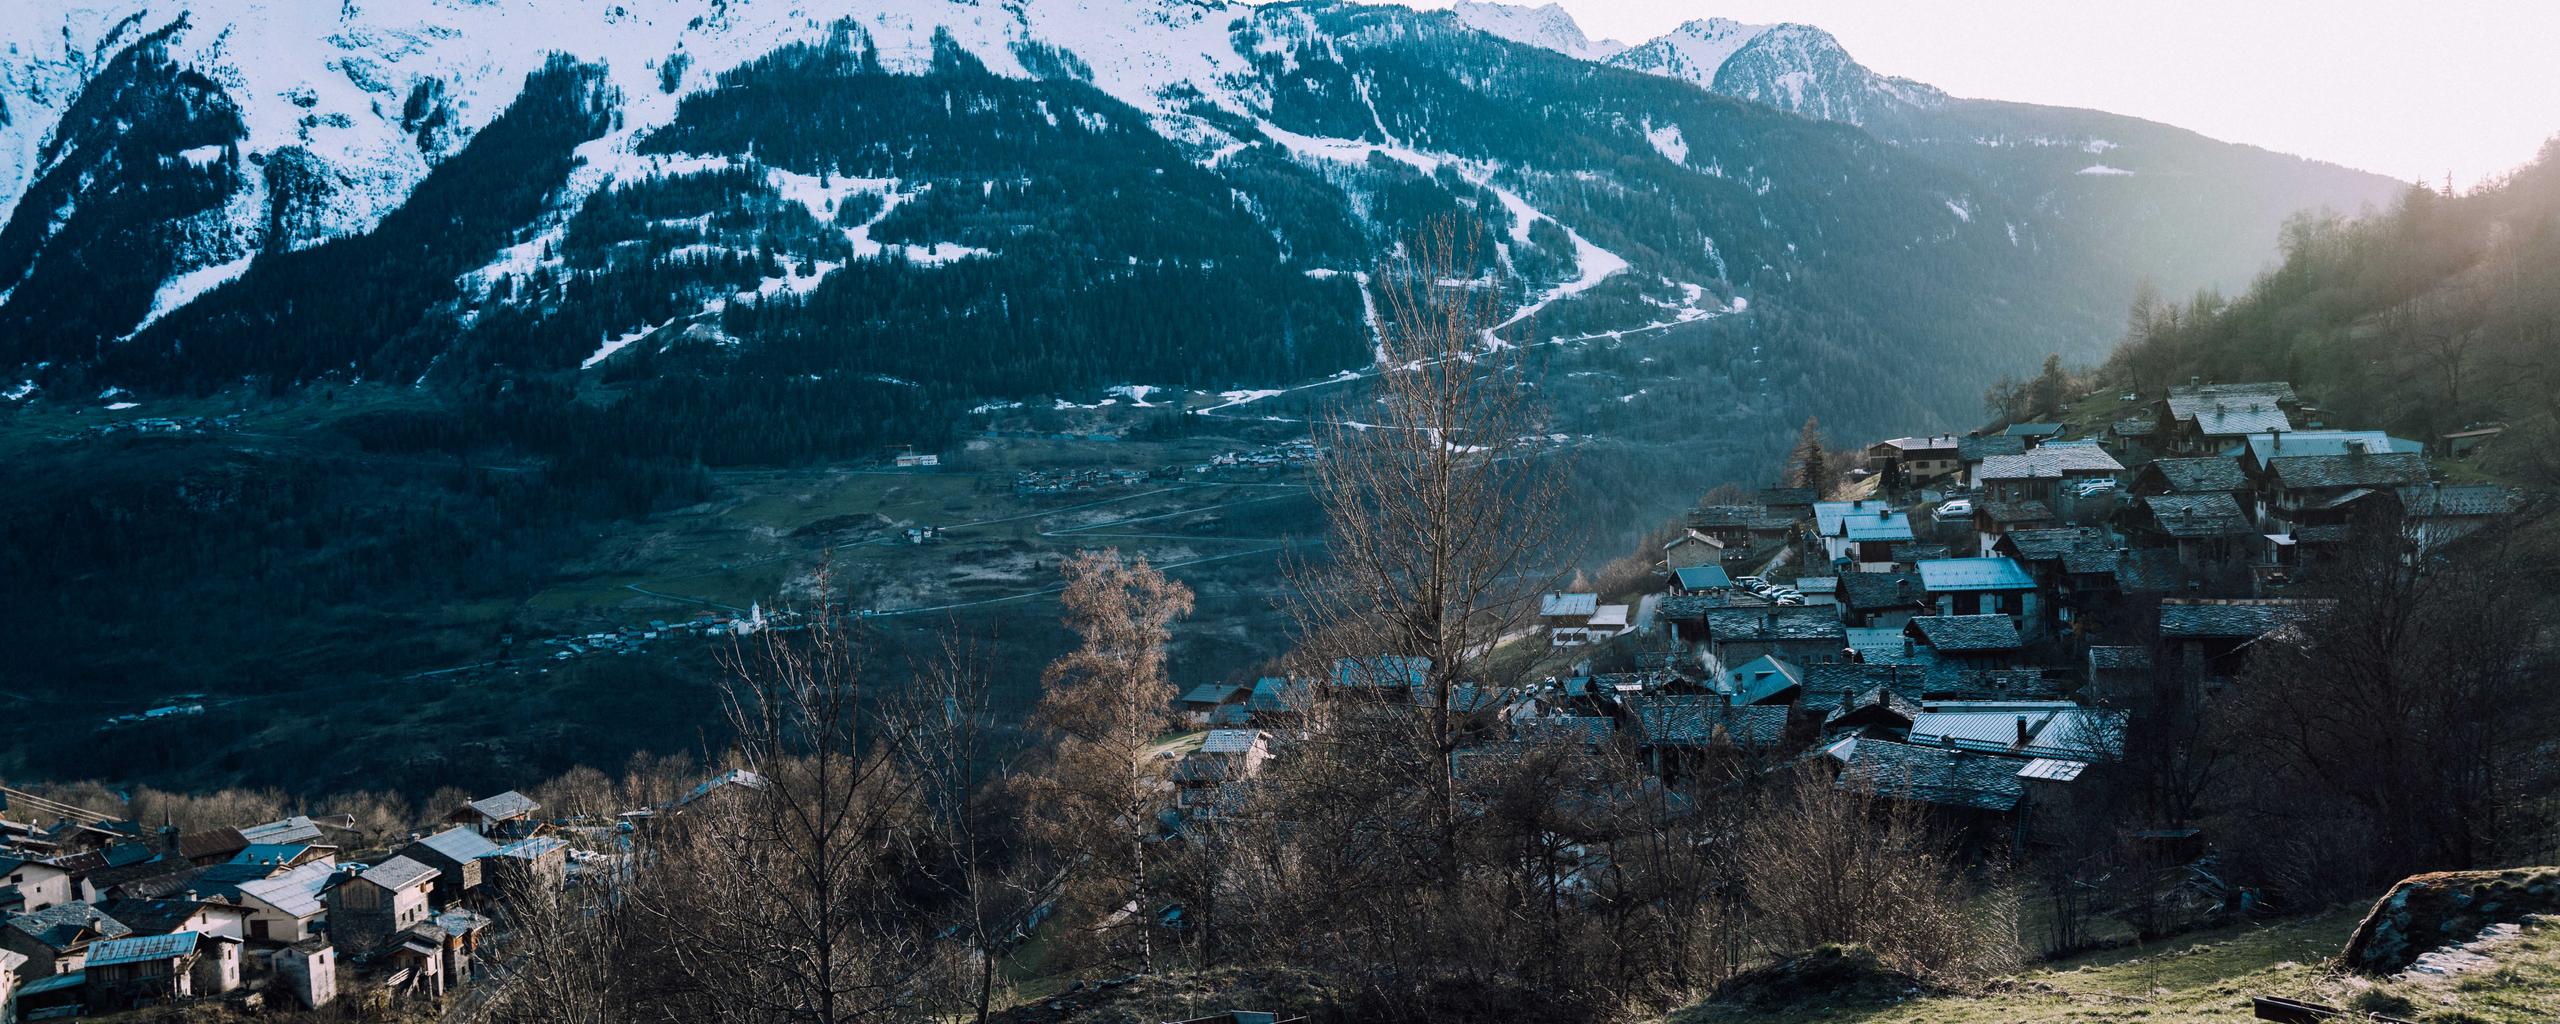 Landscape of homes in front of snowy French Alps